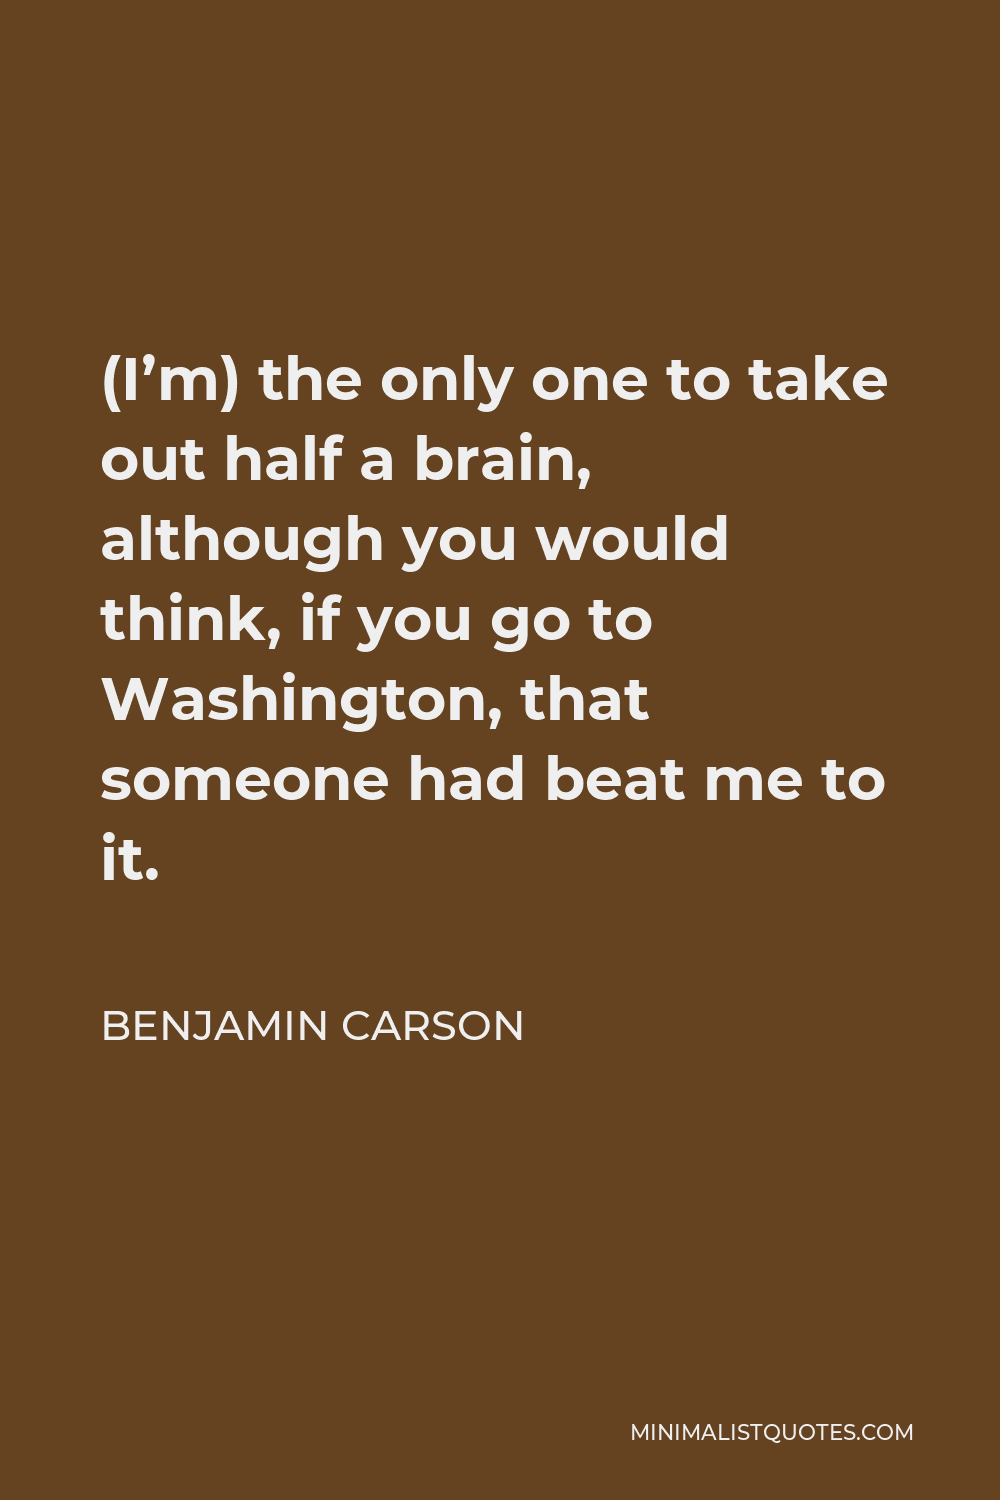 Benjamin Carson Quote - (I’m) the only one to take out half a brain, although you would think, if you go to Washington, that someone had beat me to it.